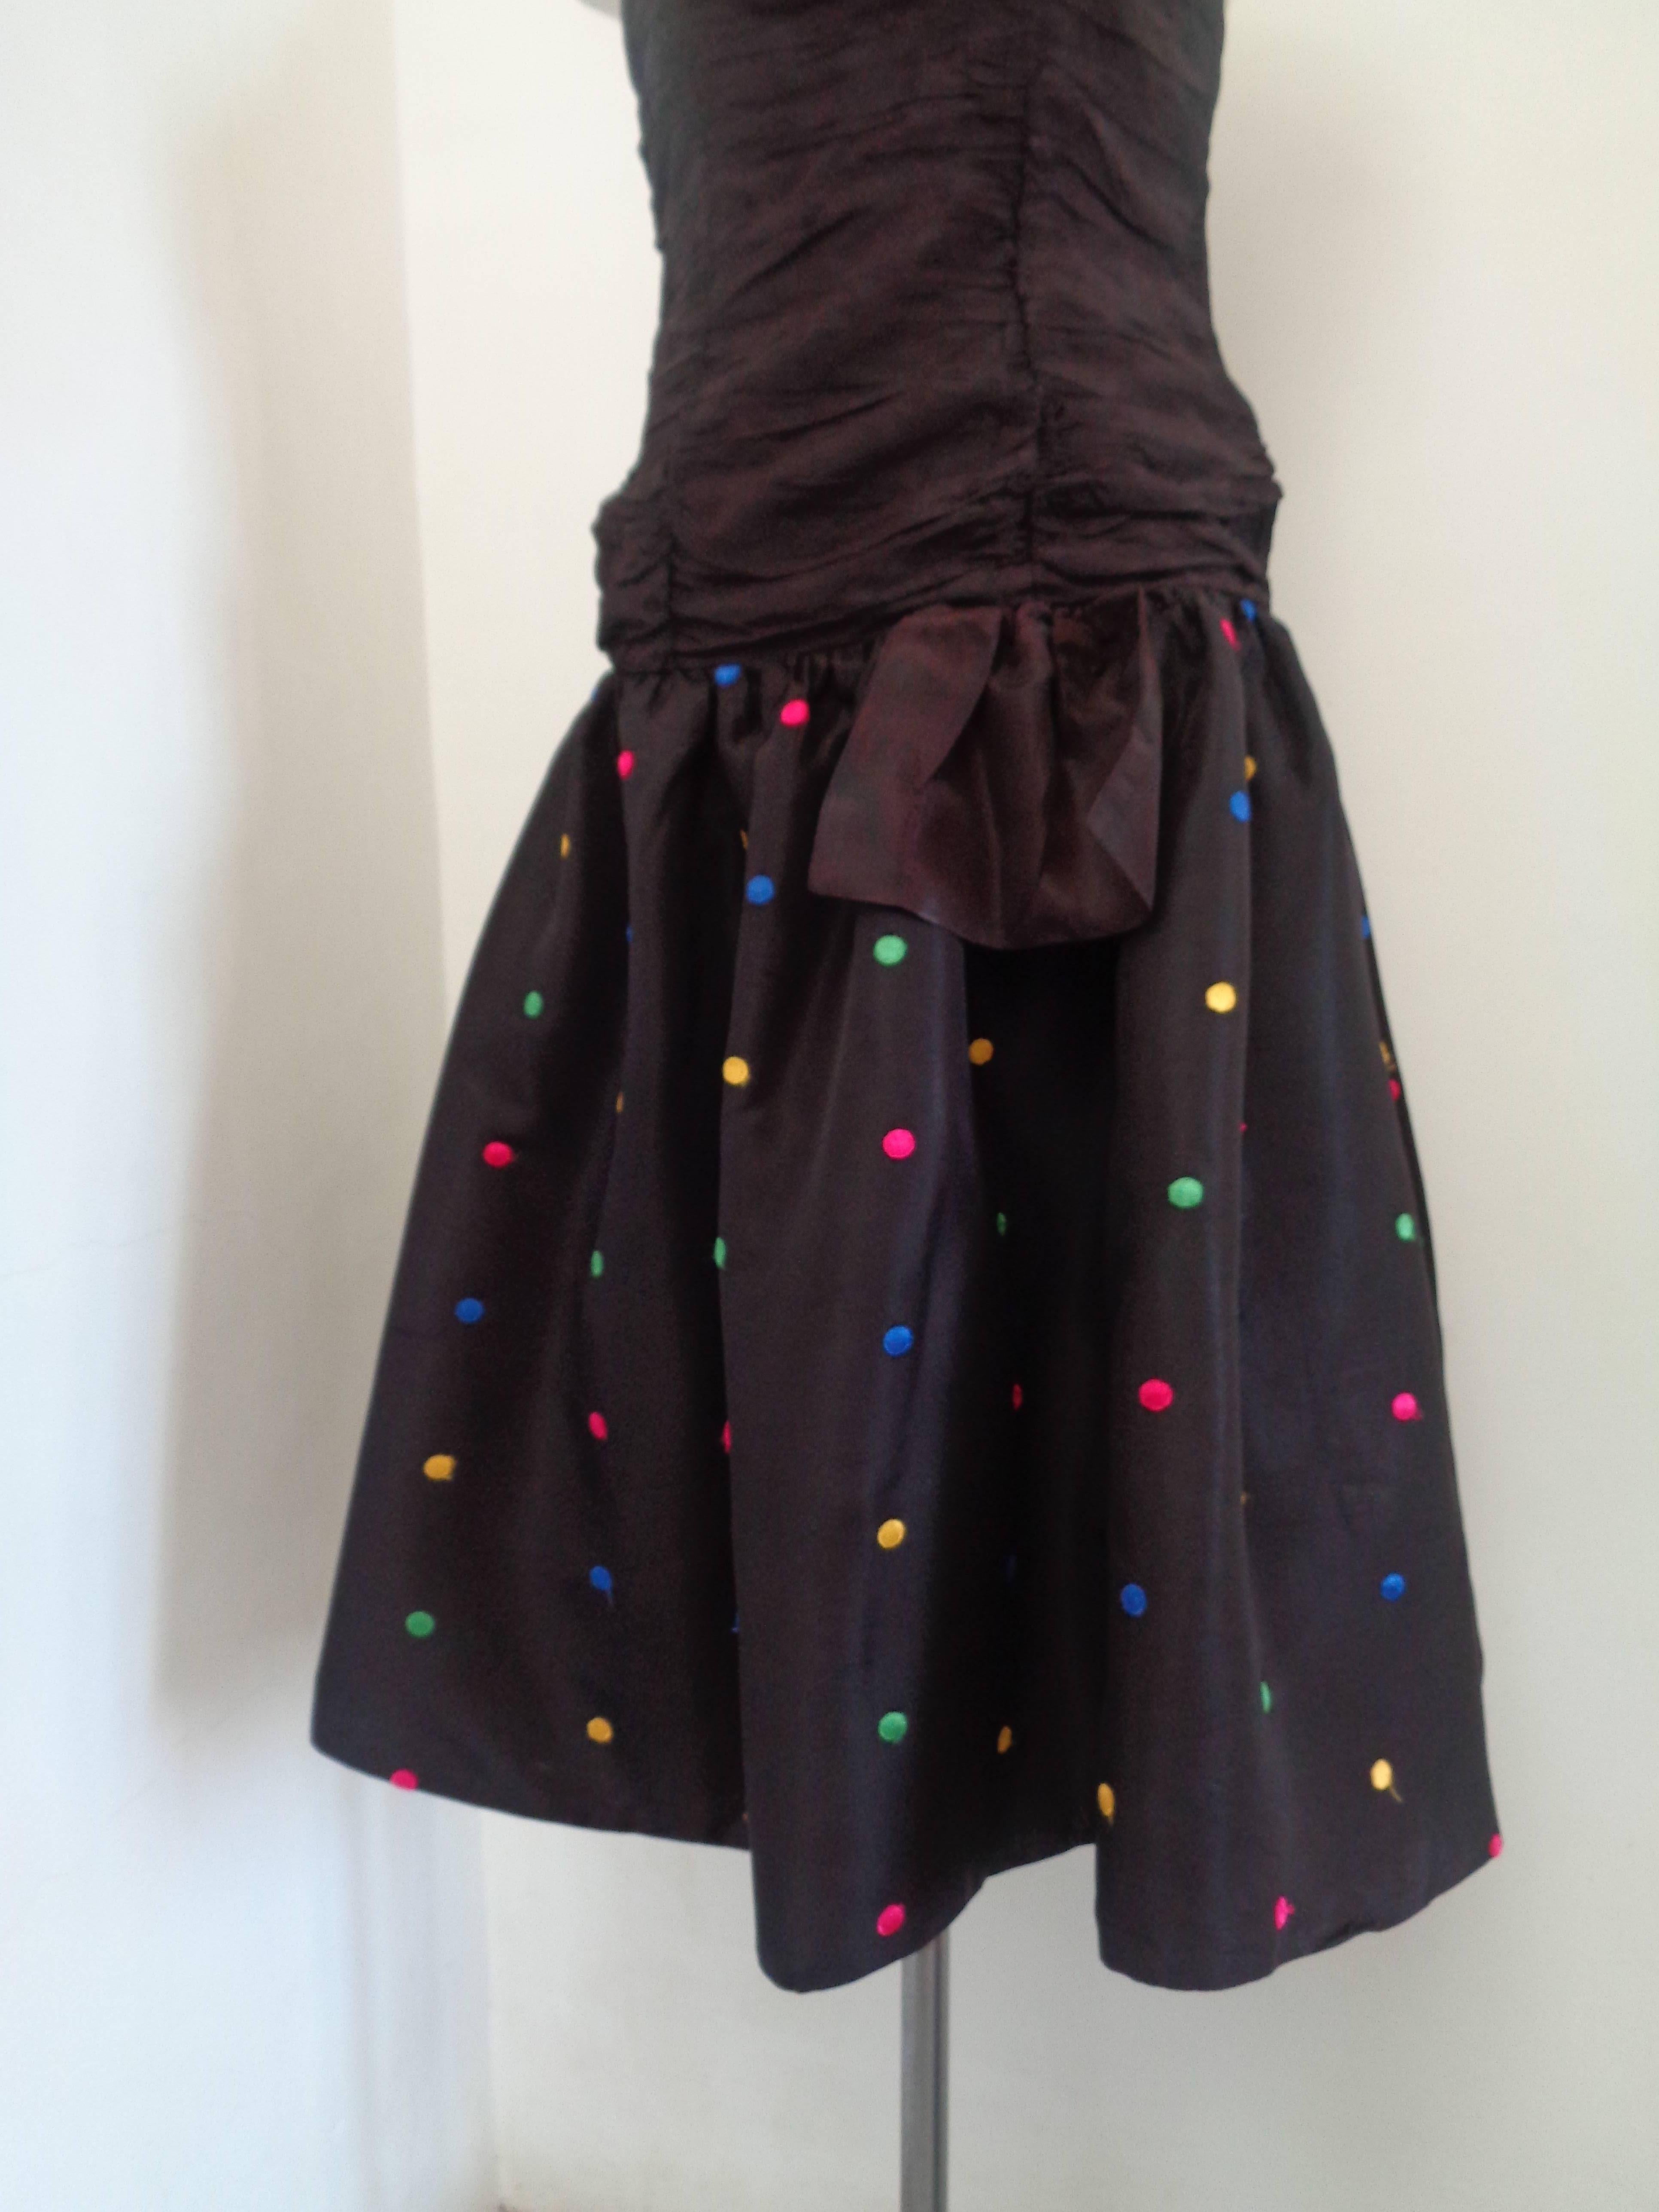 1980s Prom Night Blacke Dress Embellished Pois on Skirt

Totally made in italy 

Composition: Viscose polyester polyamide

Size 36